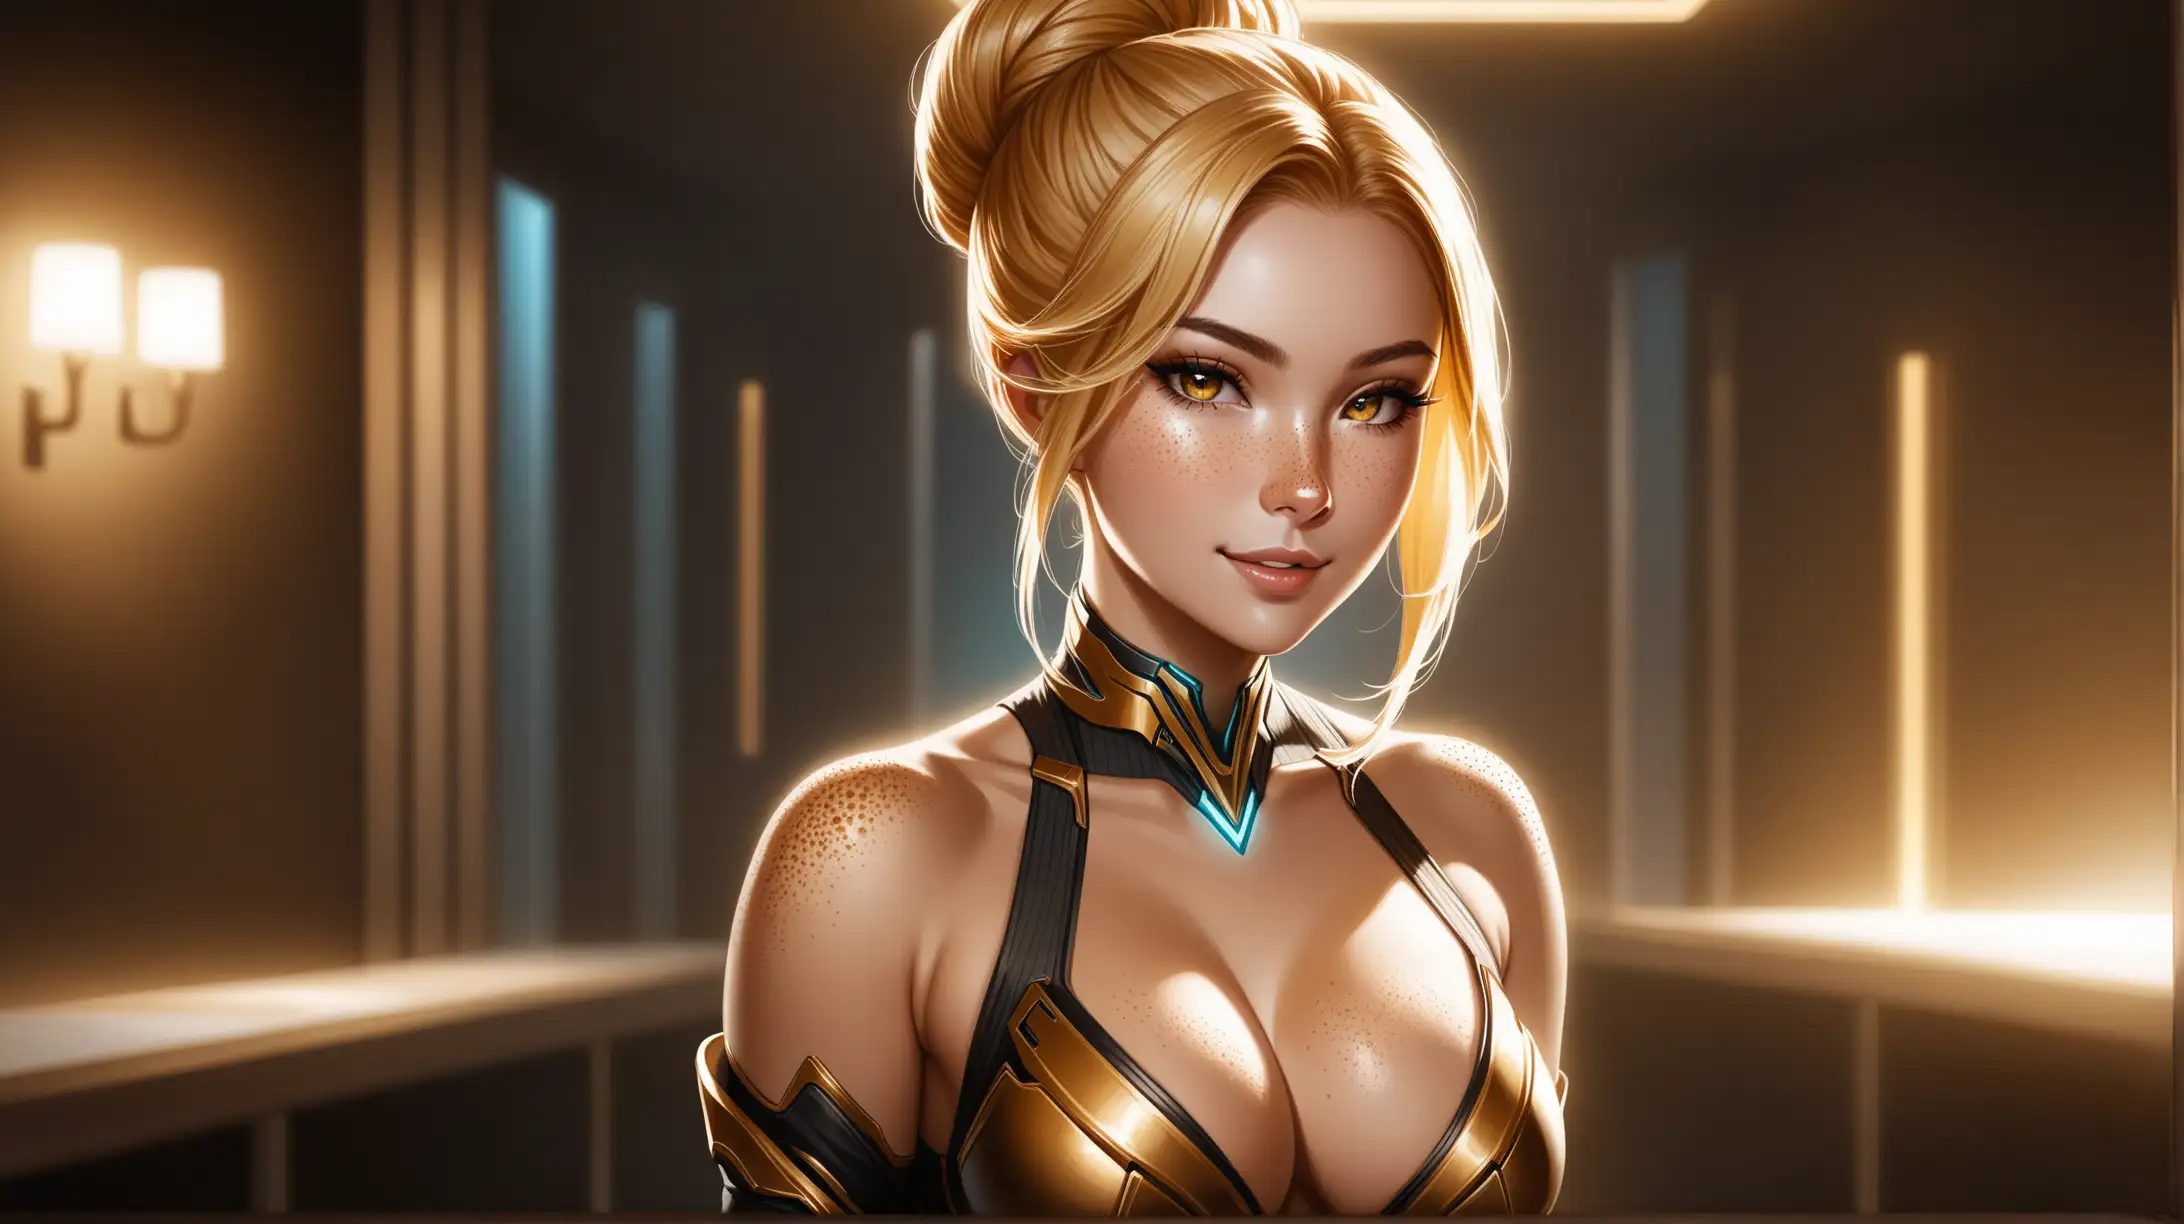 Seductive Blonde Woman in Warframeinspired Outfit Smiling in Ambient Indoor Lighting